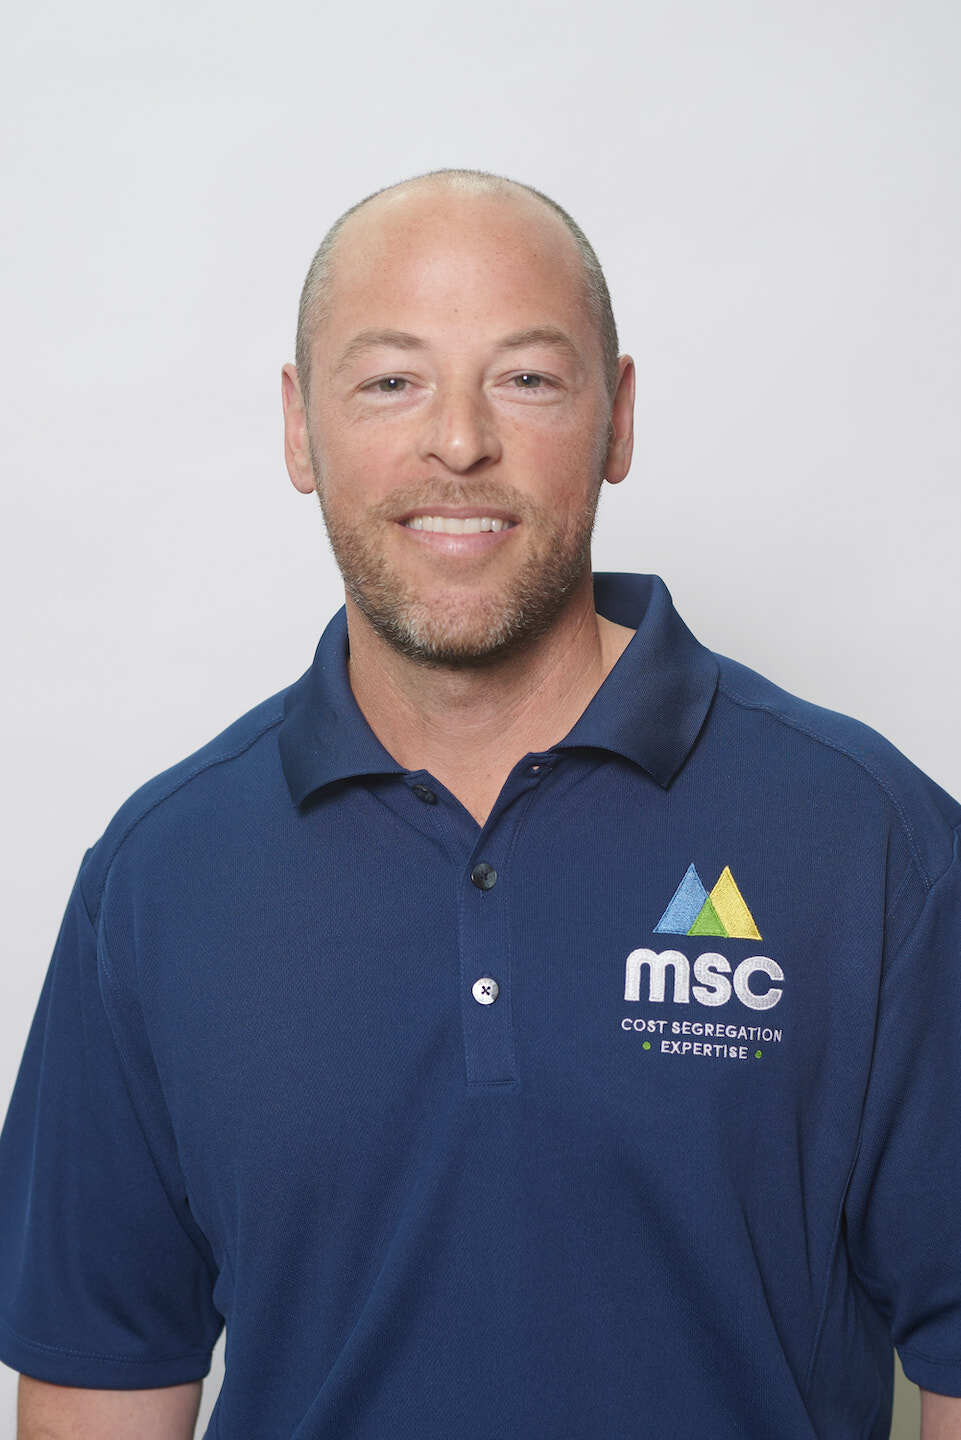 Jason Hussar, Cost Segregation Manager at MS Consultants.